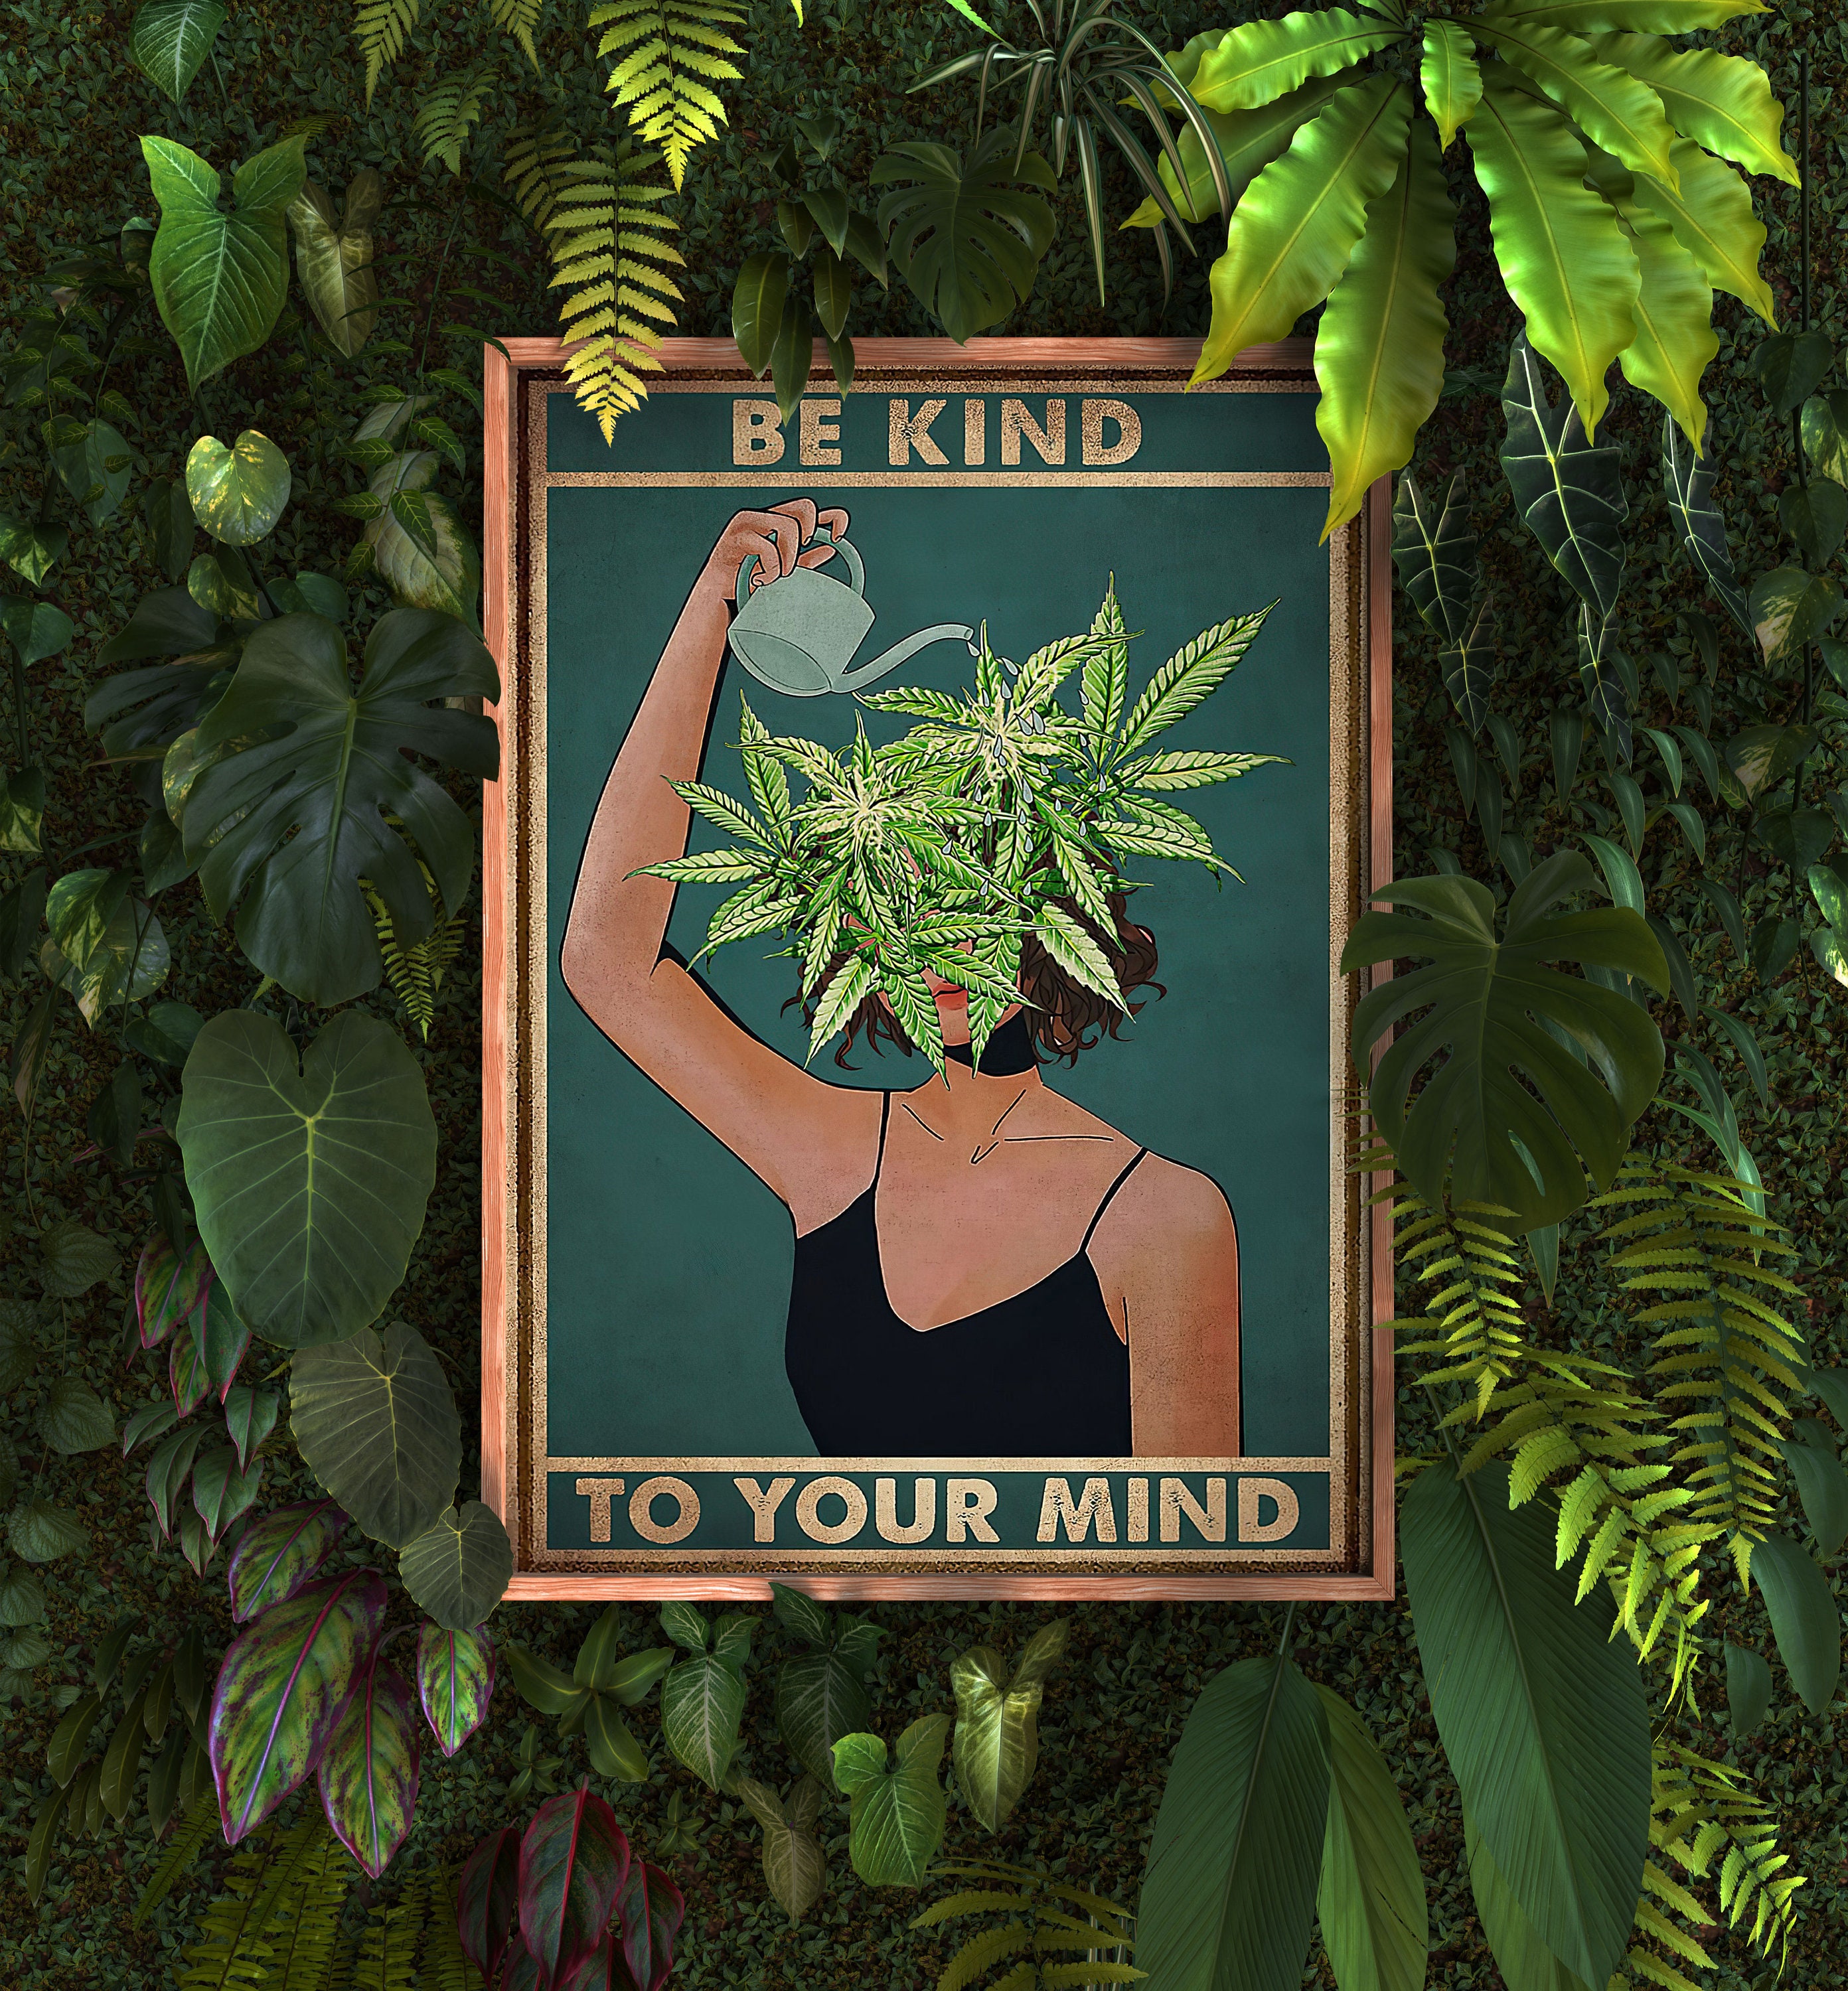 Stoner Aesthetic: The cannabis-inspired fashion label with big ambitions -  Hollyweed CBD